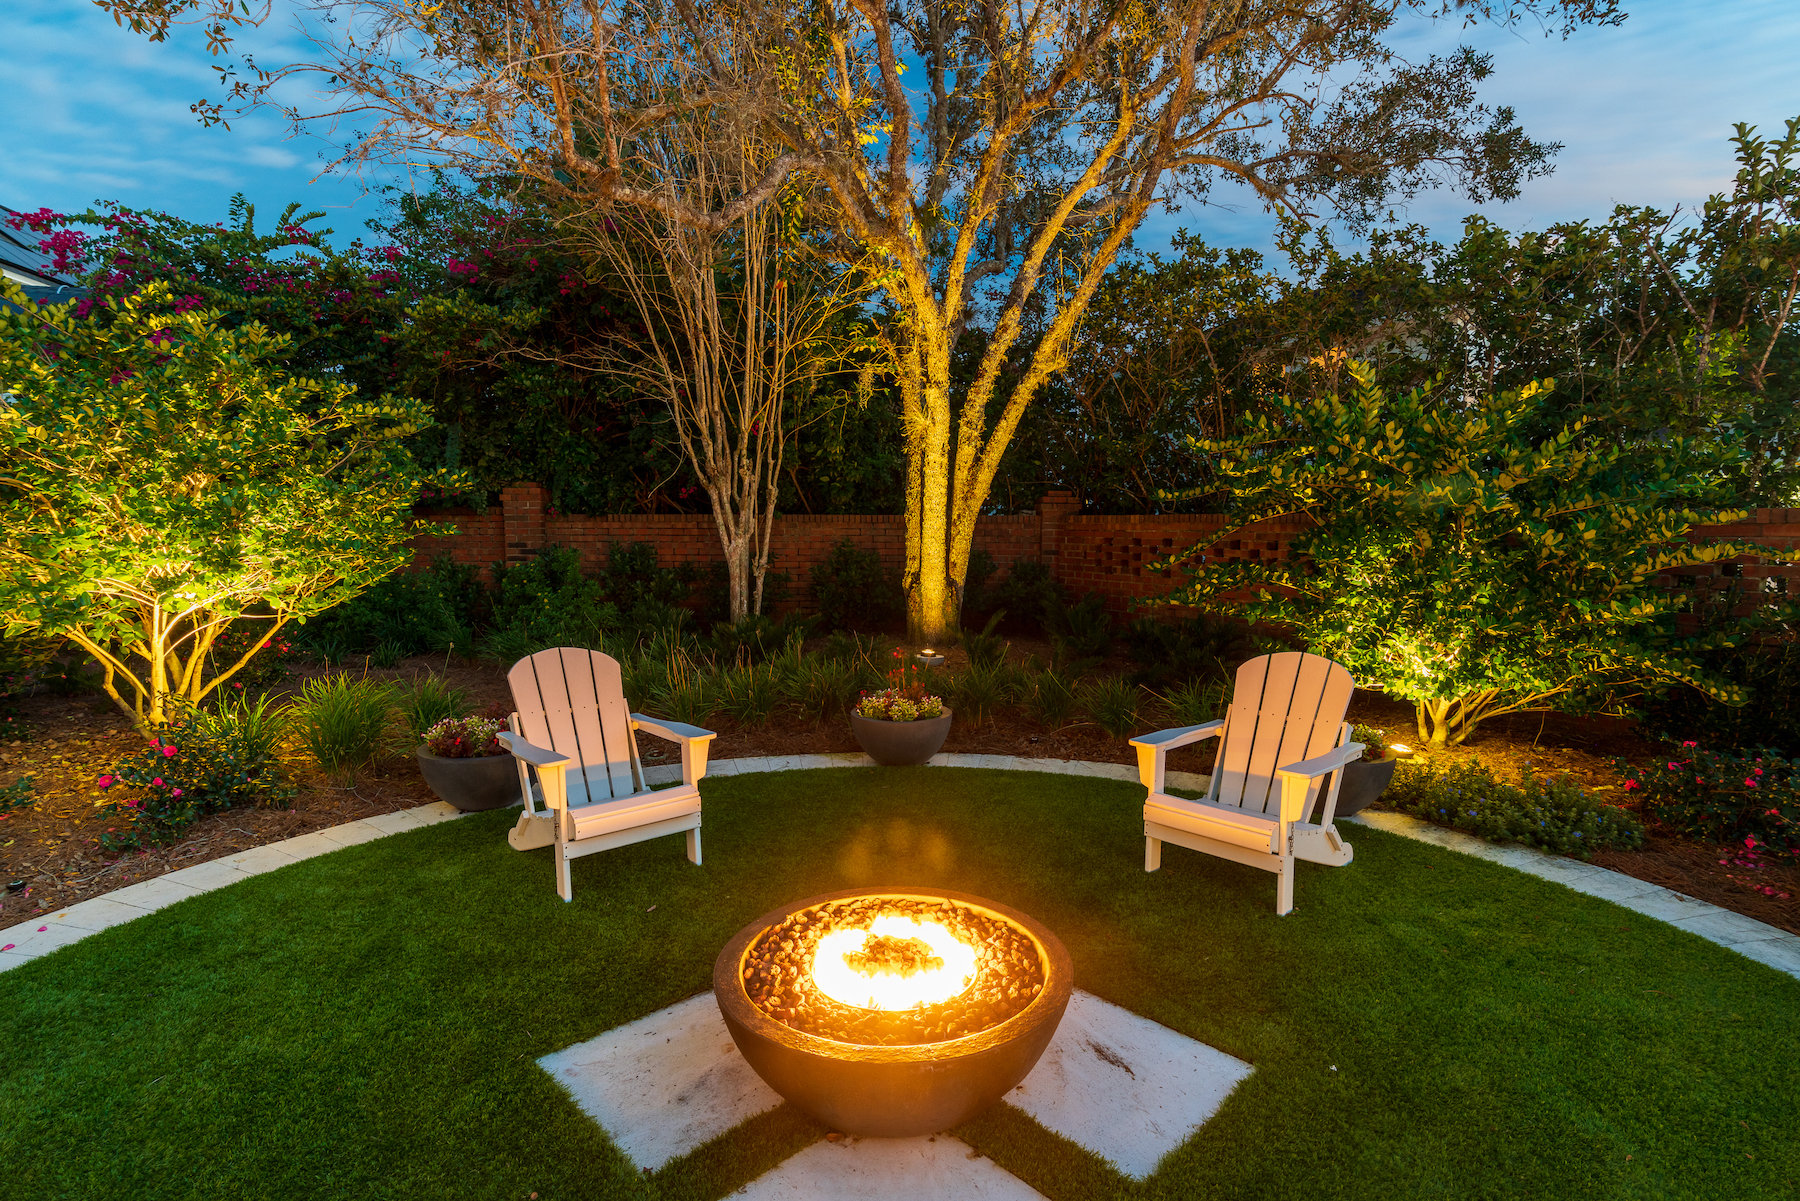 landscape lighting with firebowl and seating area